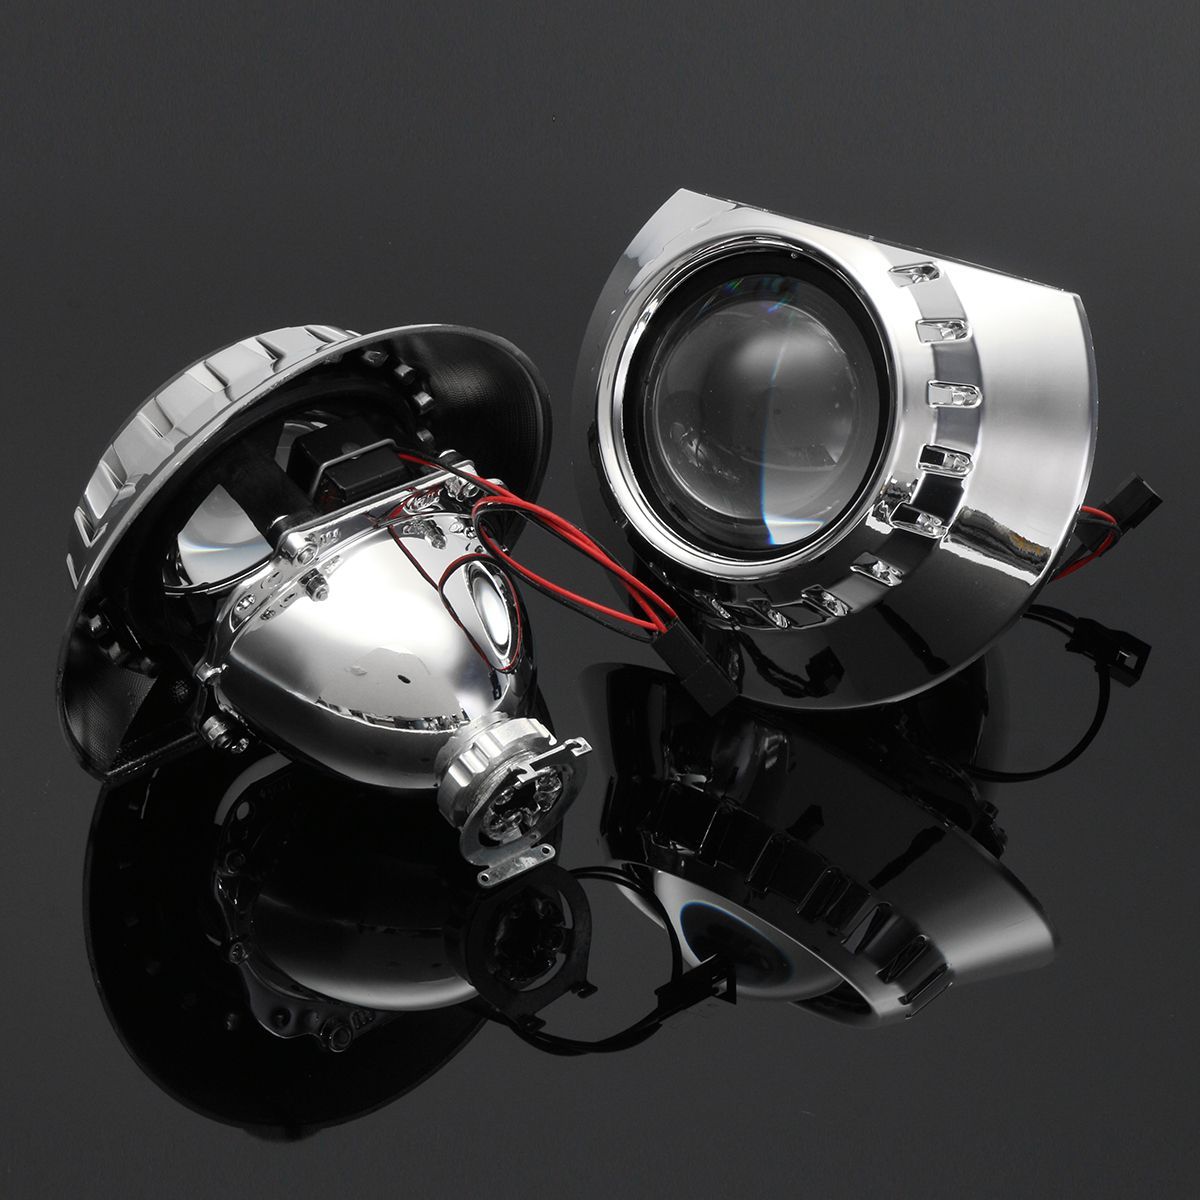 2PCS-25-Inch-H1-Xenon-HID-Headlights-Projector-Glass-Lens-without-Bulbs-Retrofit-LHD-For-BMW-3-Serie-1622060